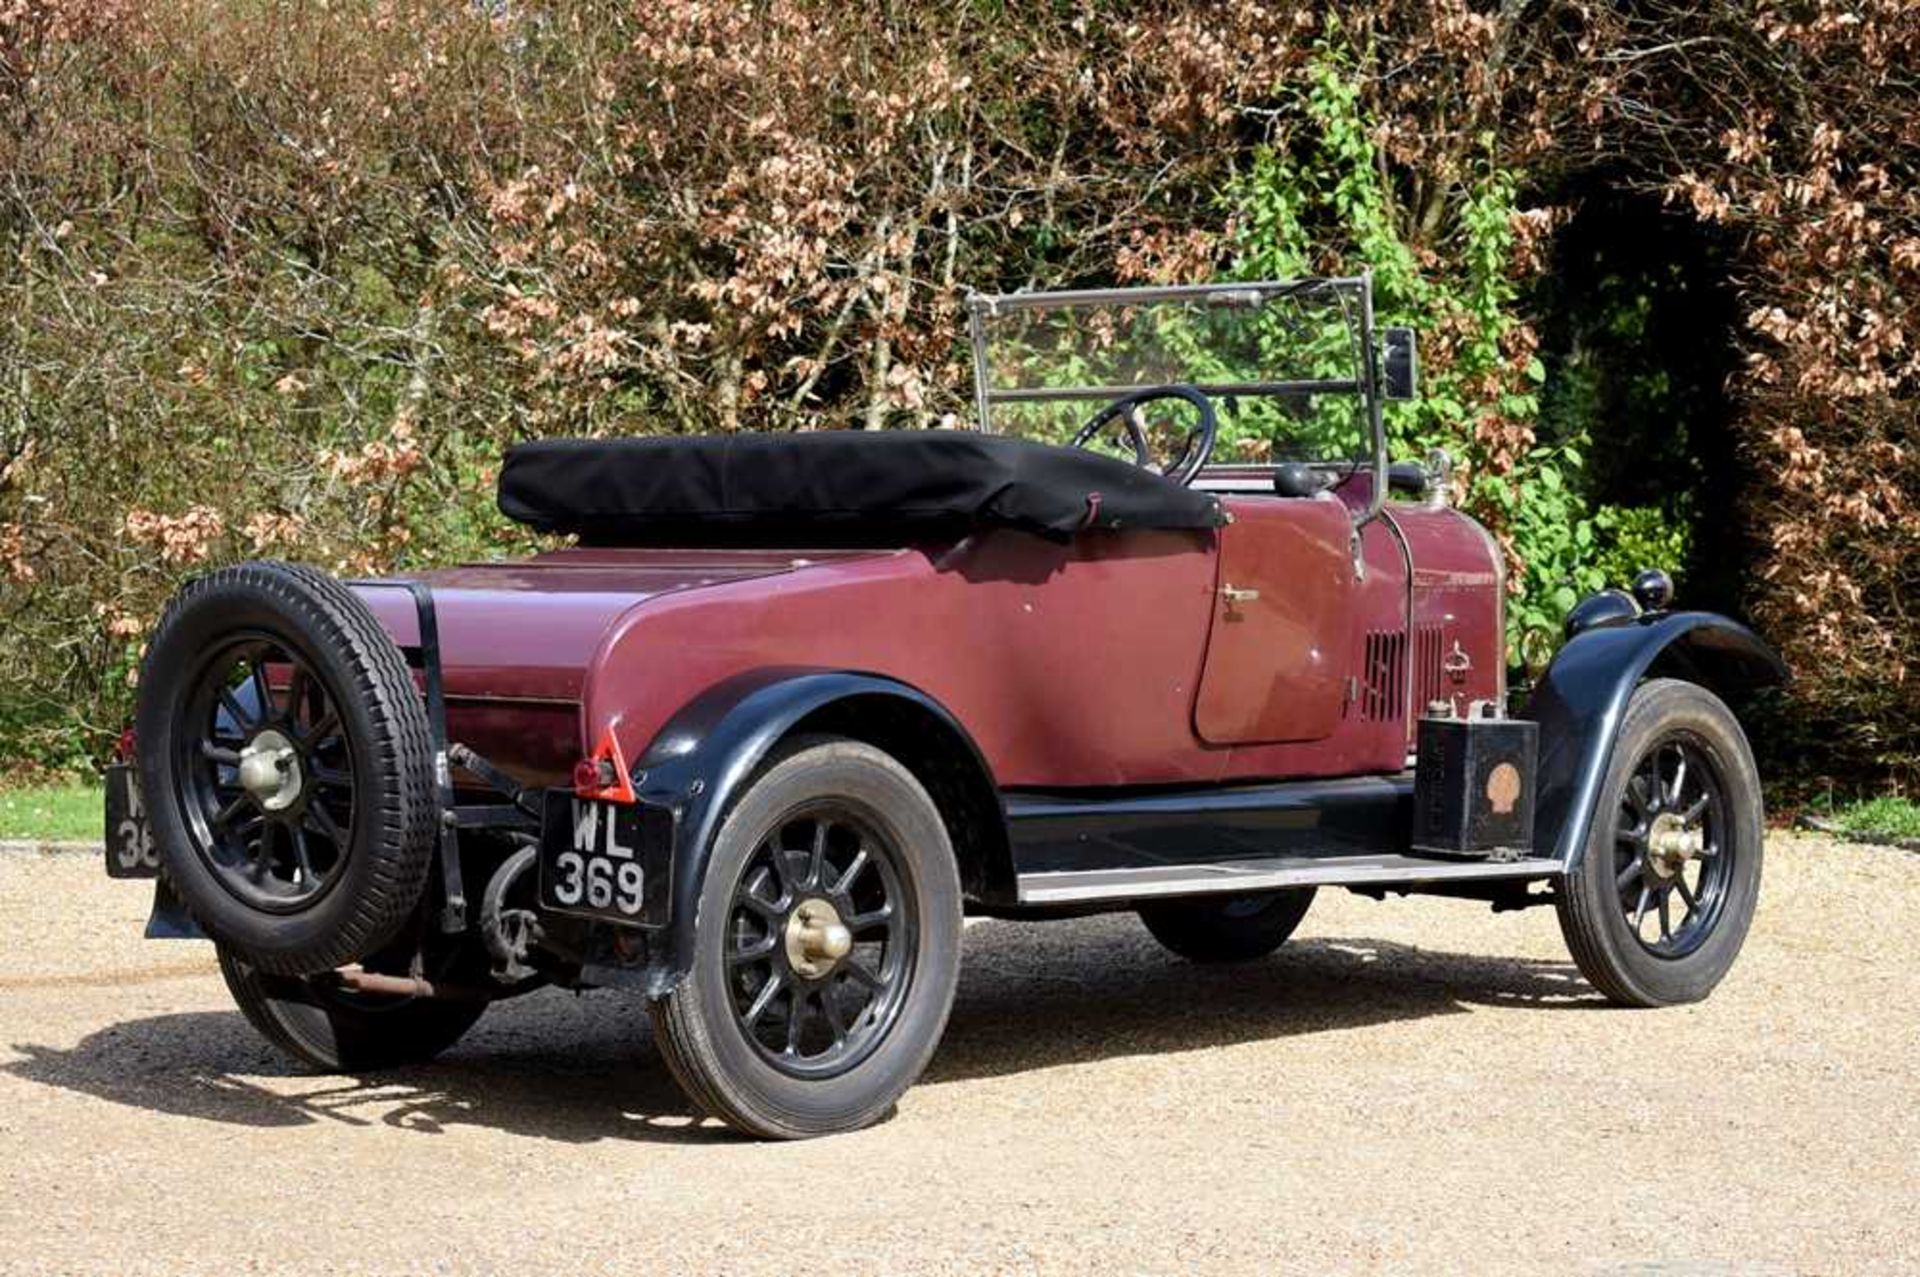 1926 Morris Oxford 'Bullnose' 2-Seat Tourer with Dickey - Image 22 of 99